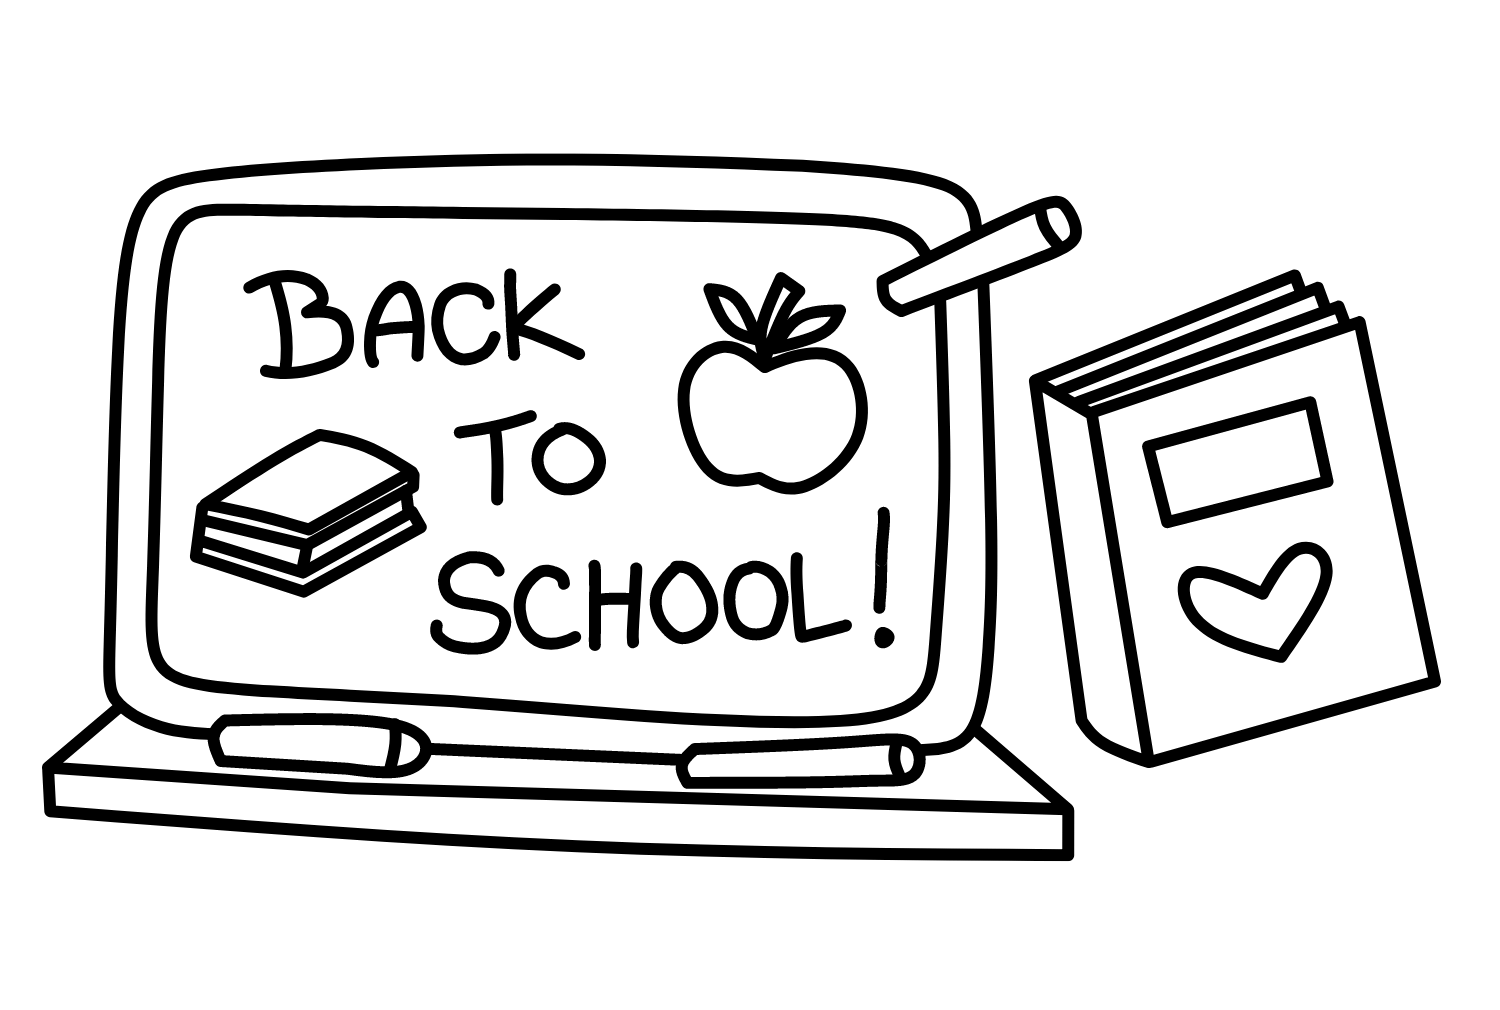 Back to School Coloring Sheet from Back to School